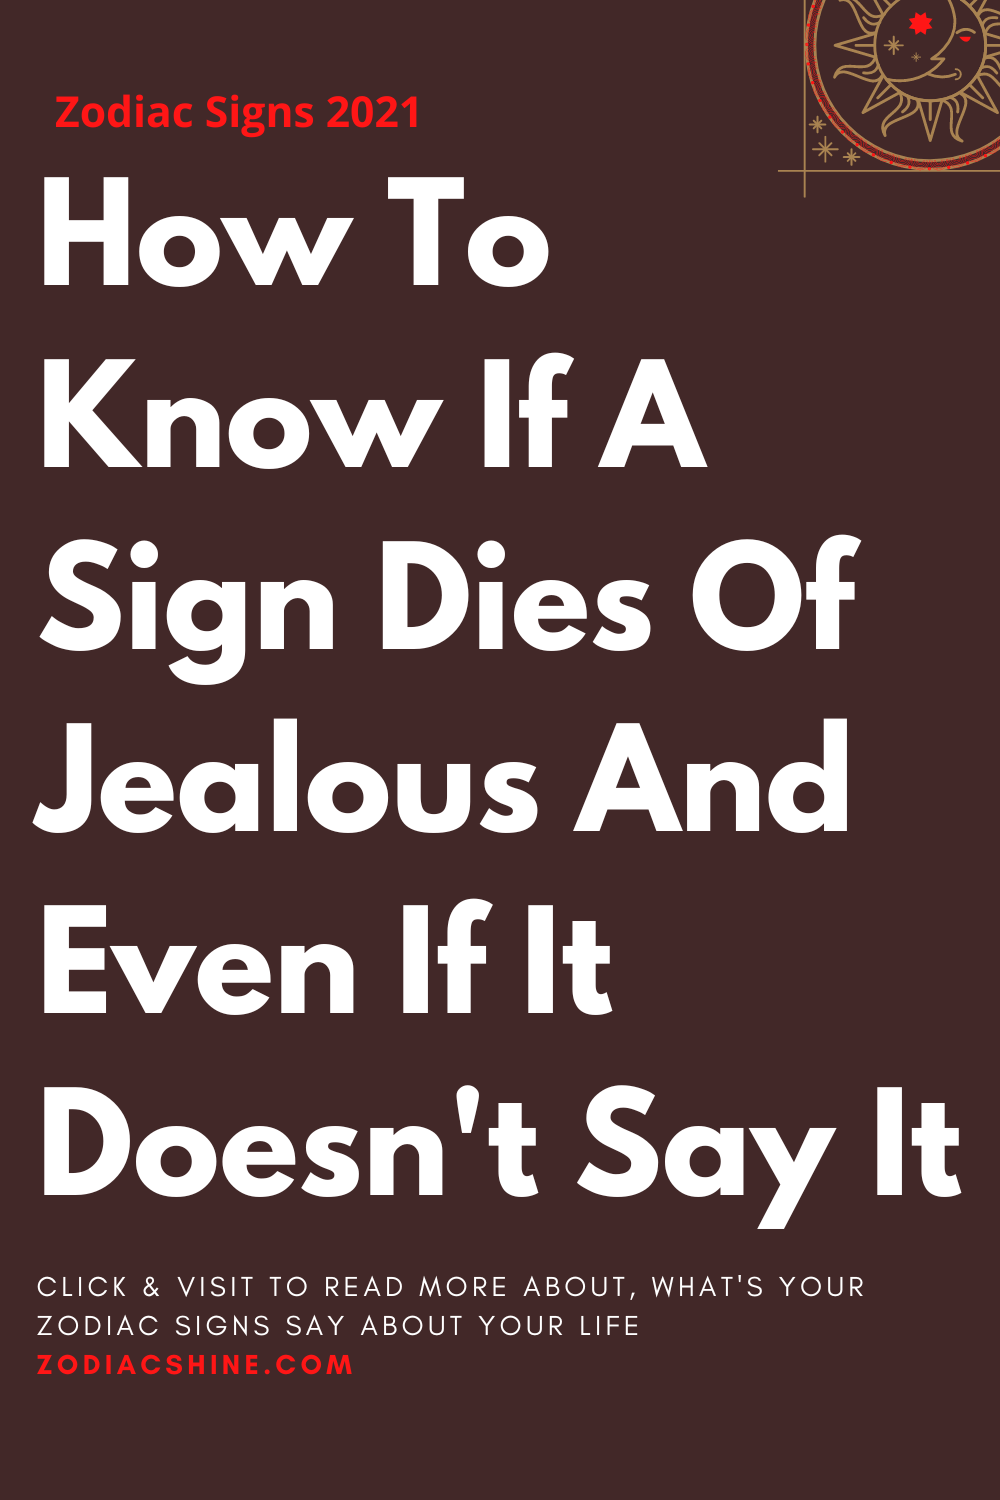 How To Know If A Sign Dies Of Jealous And Even If It Doesn't Say It